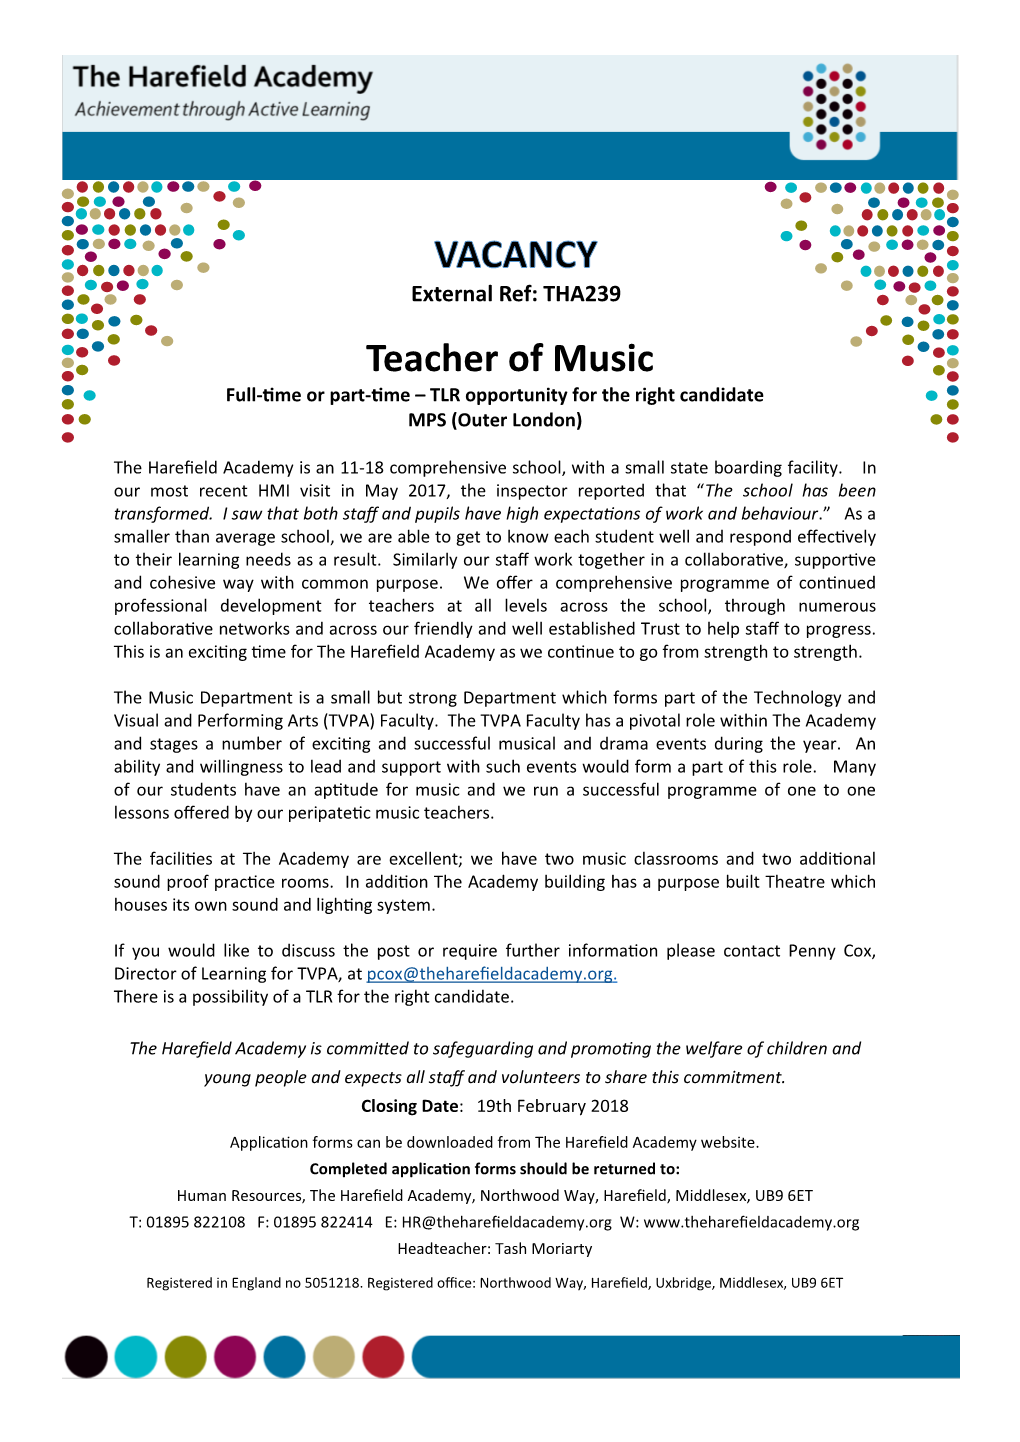 Teacher of Music Full-Time Or Part-Time – TLR Opportunity for the Right Candidate MPS (Outer London)